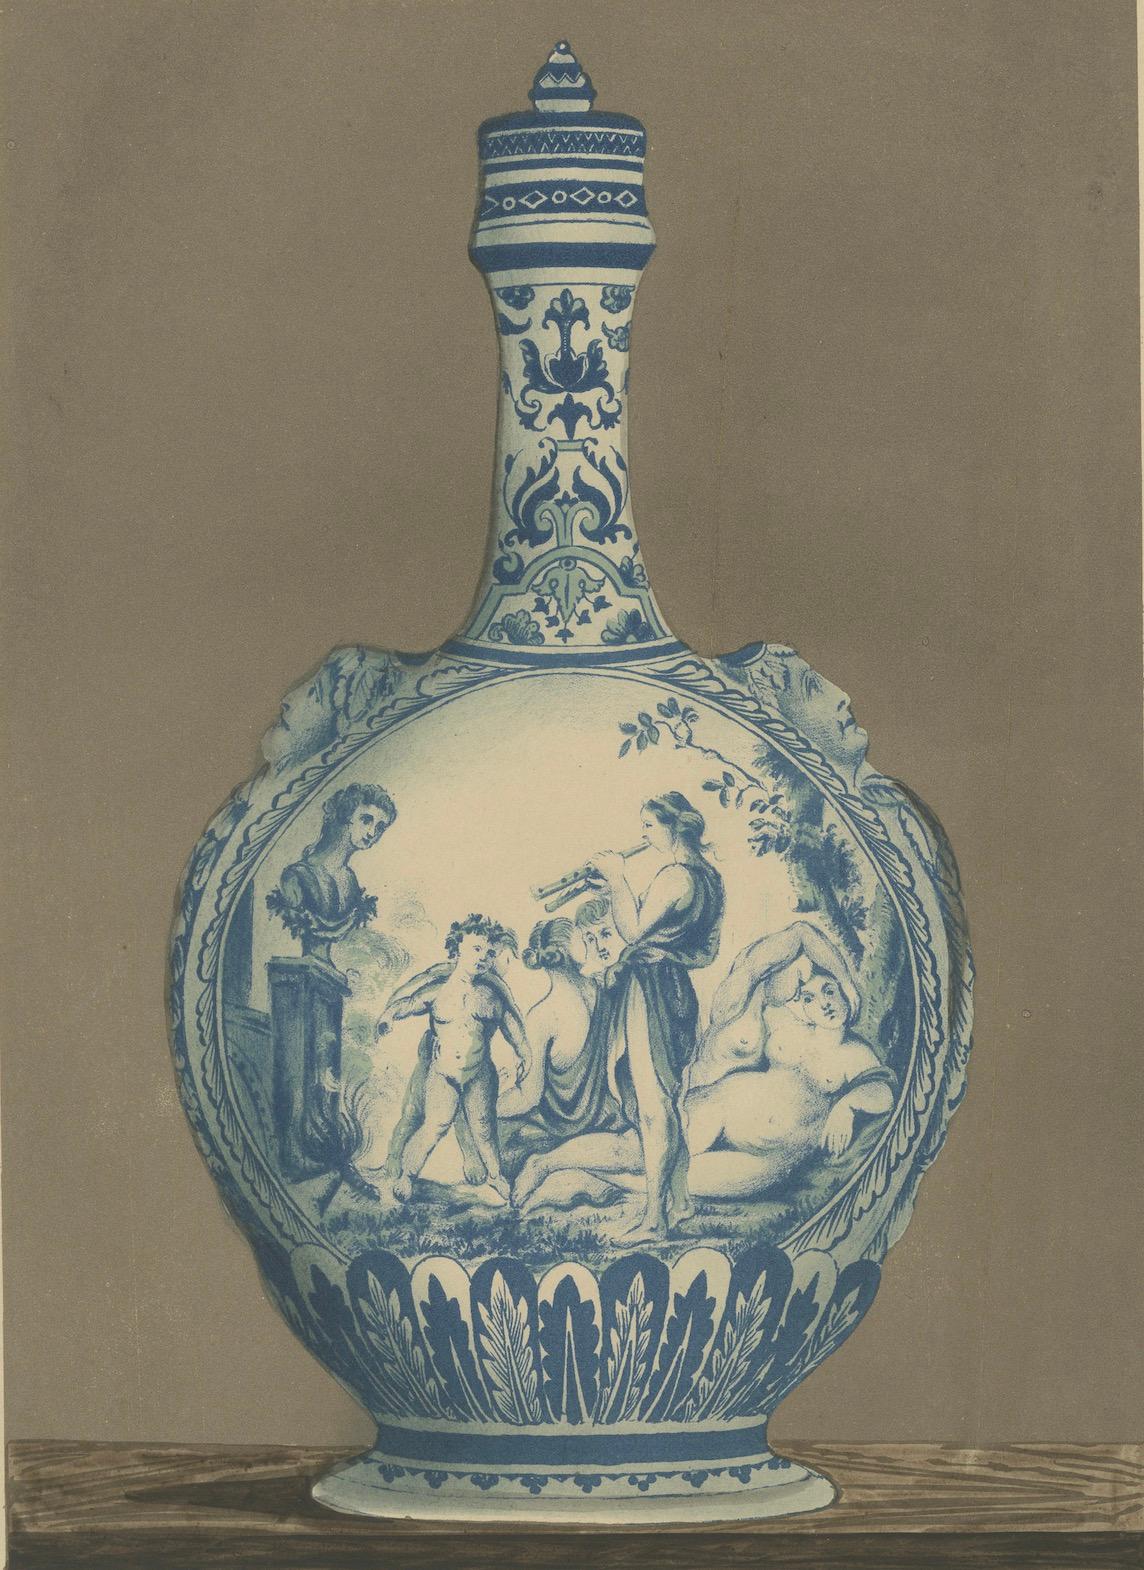 Paper Muses of Rouen: A Chromolithograph Tribute to Classical Faience Pottery, 1874